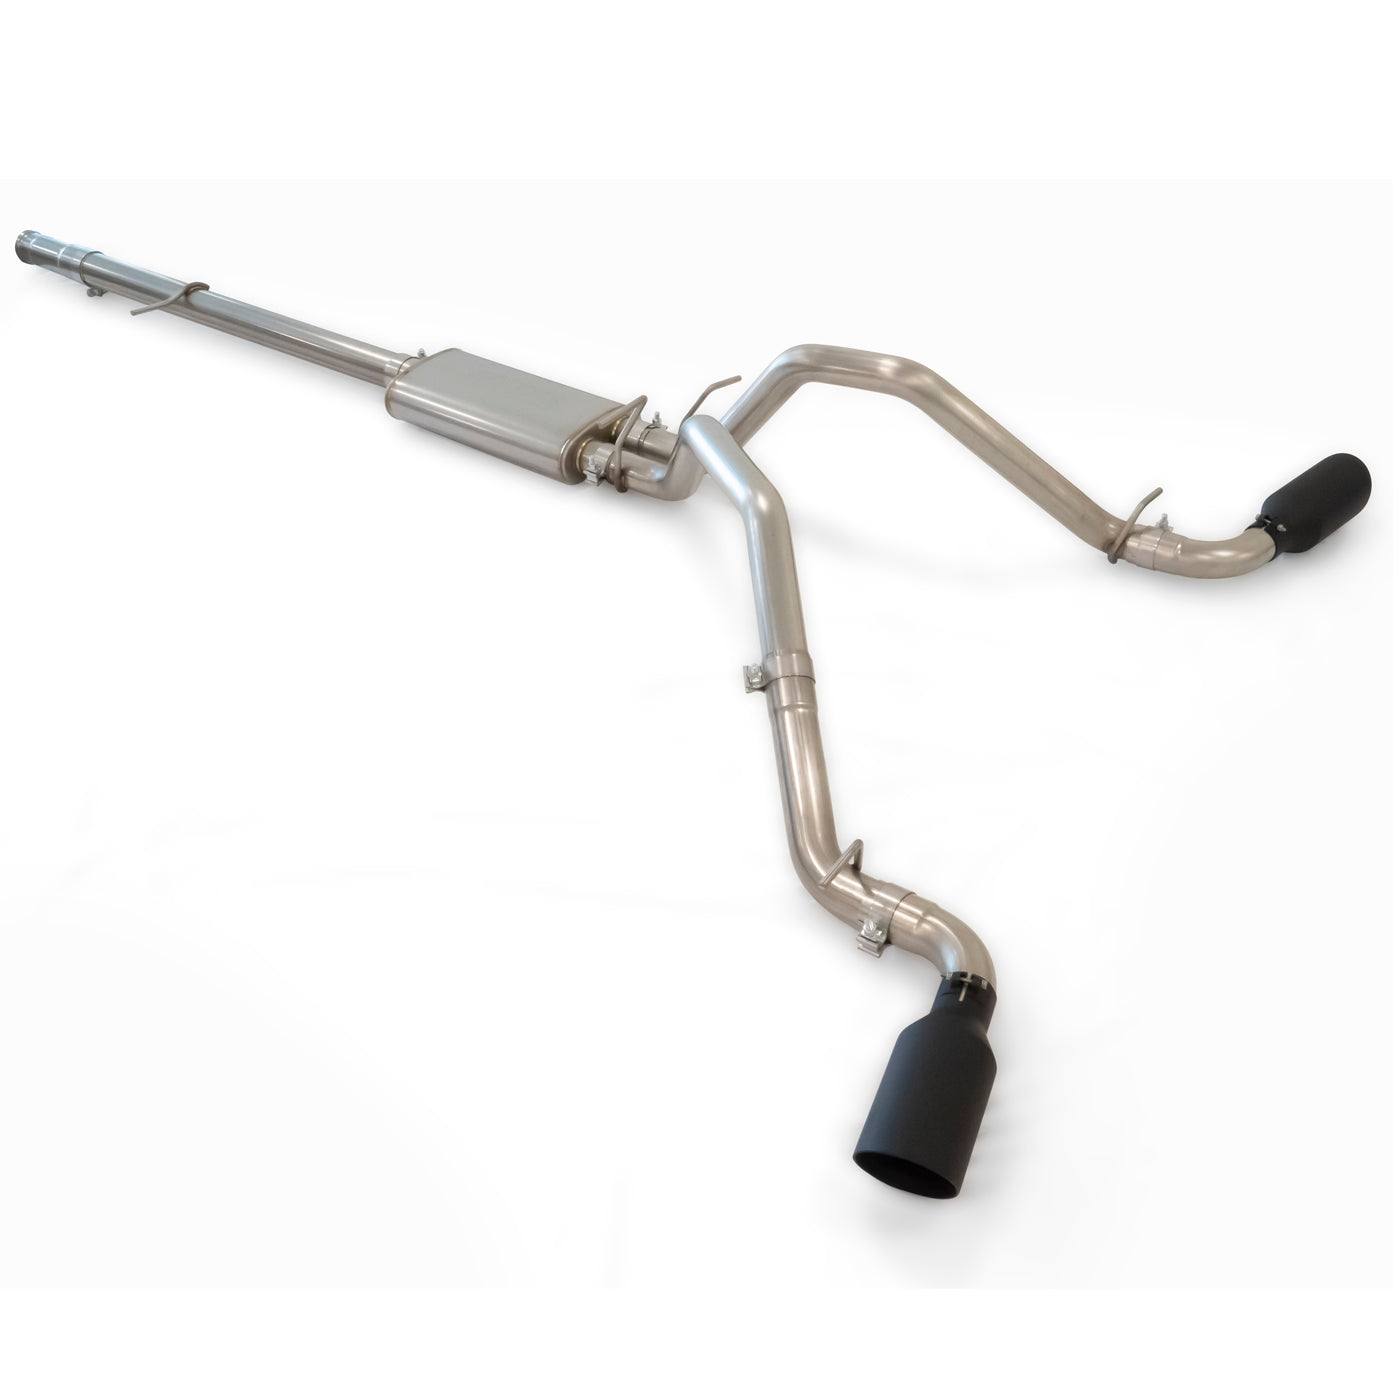 PPE Diesel GM 1500 Pickup Cat Back Exhaust System 117030030